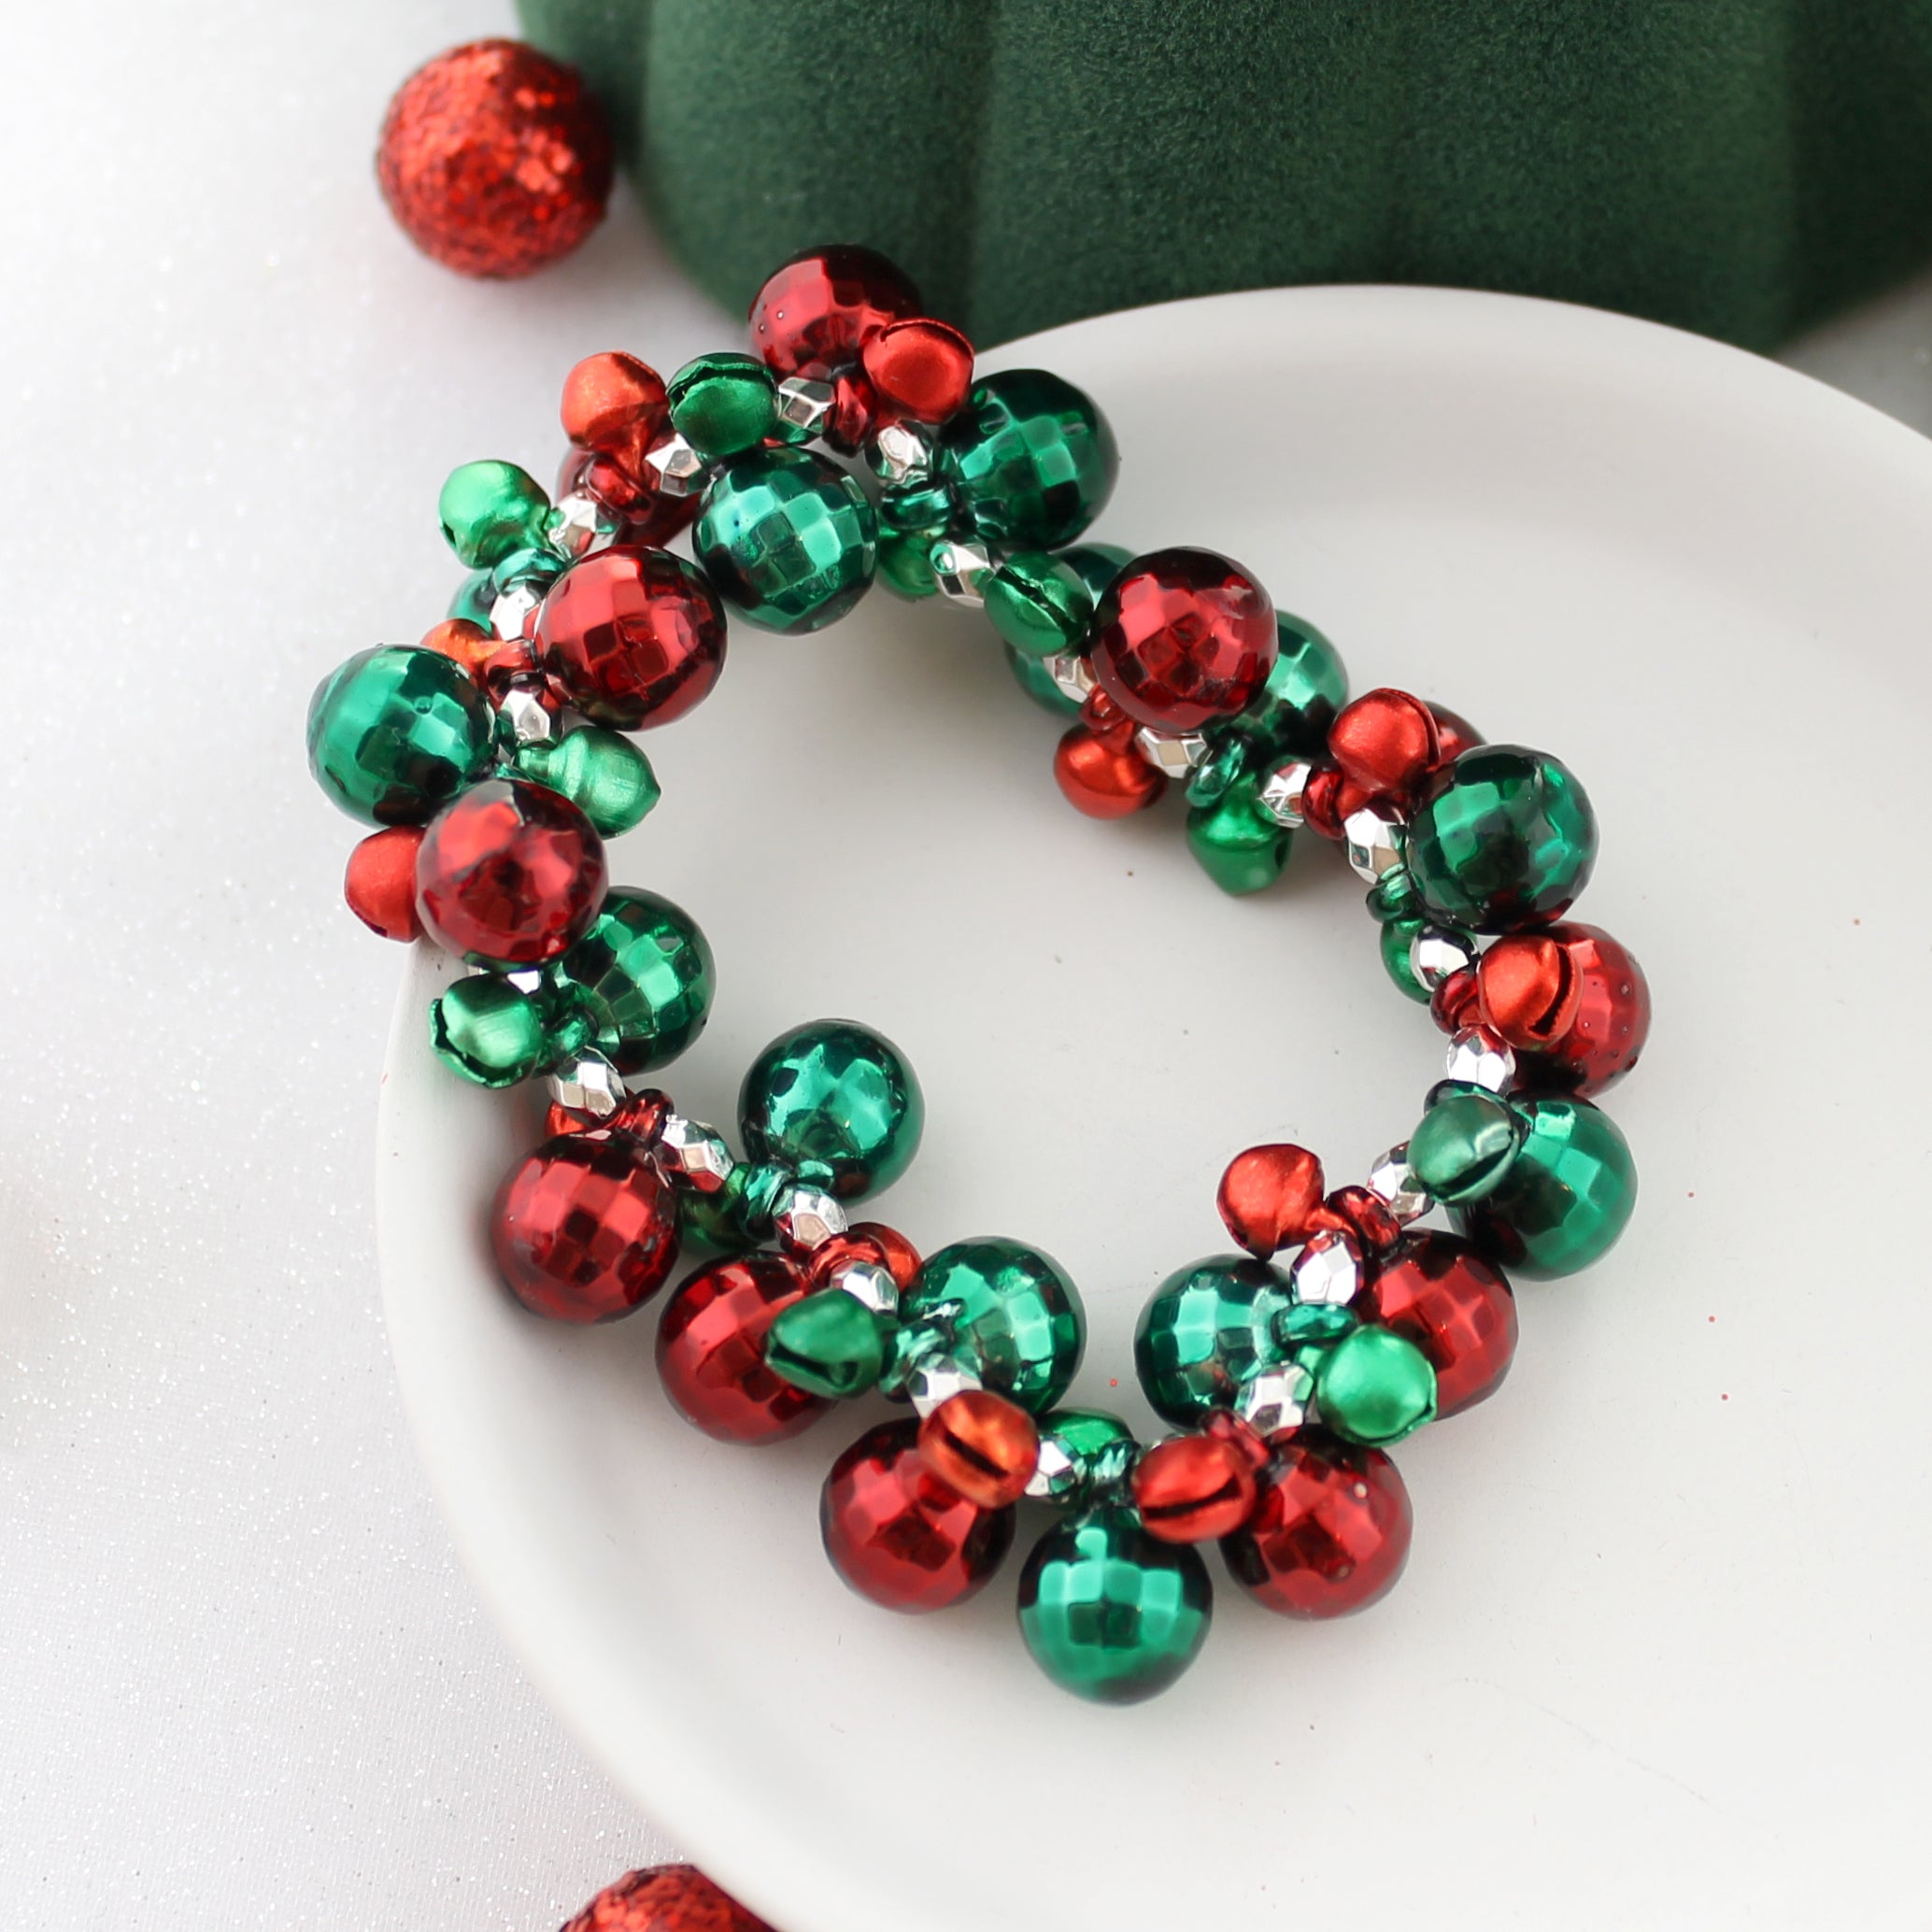 Jingle Bell Bracelet with red, green and silver seed beads. Gold